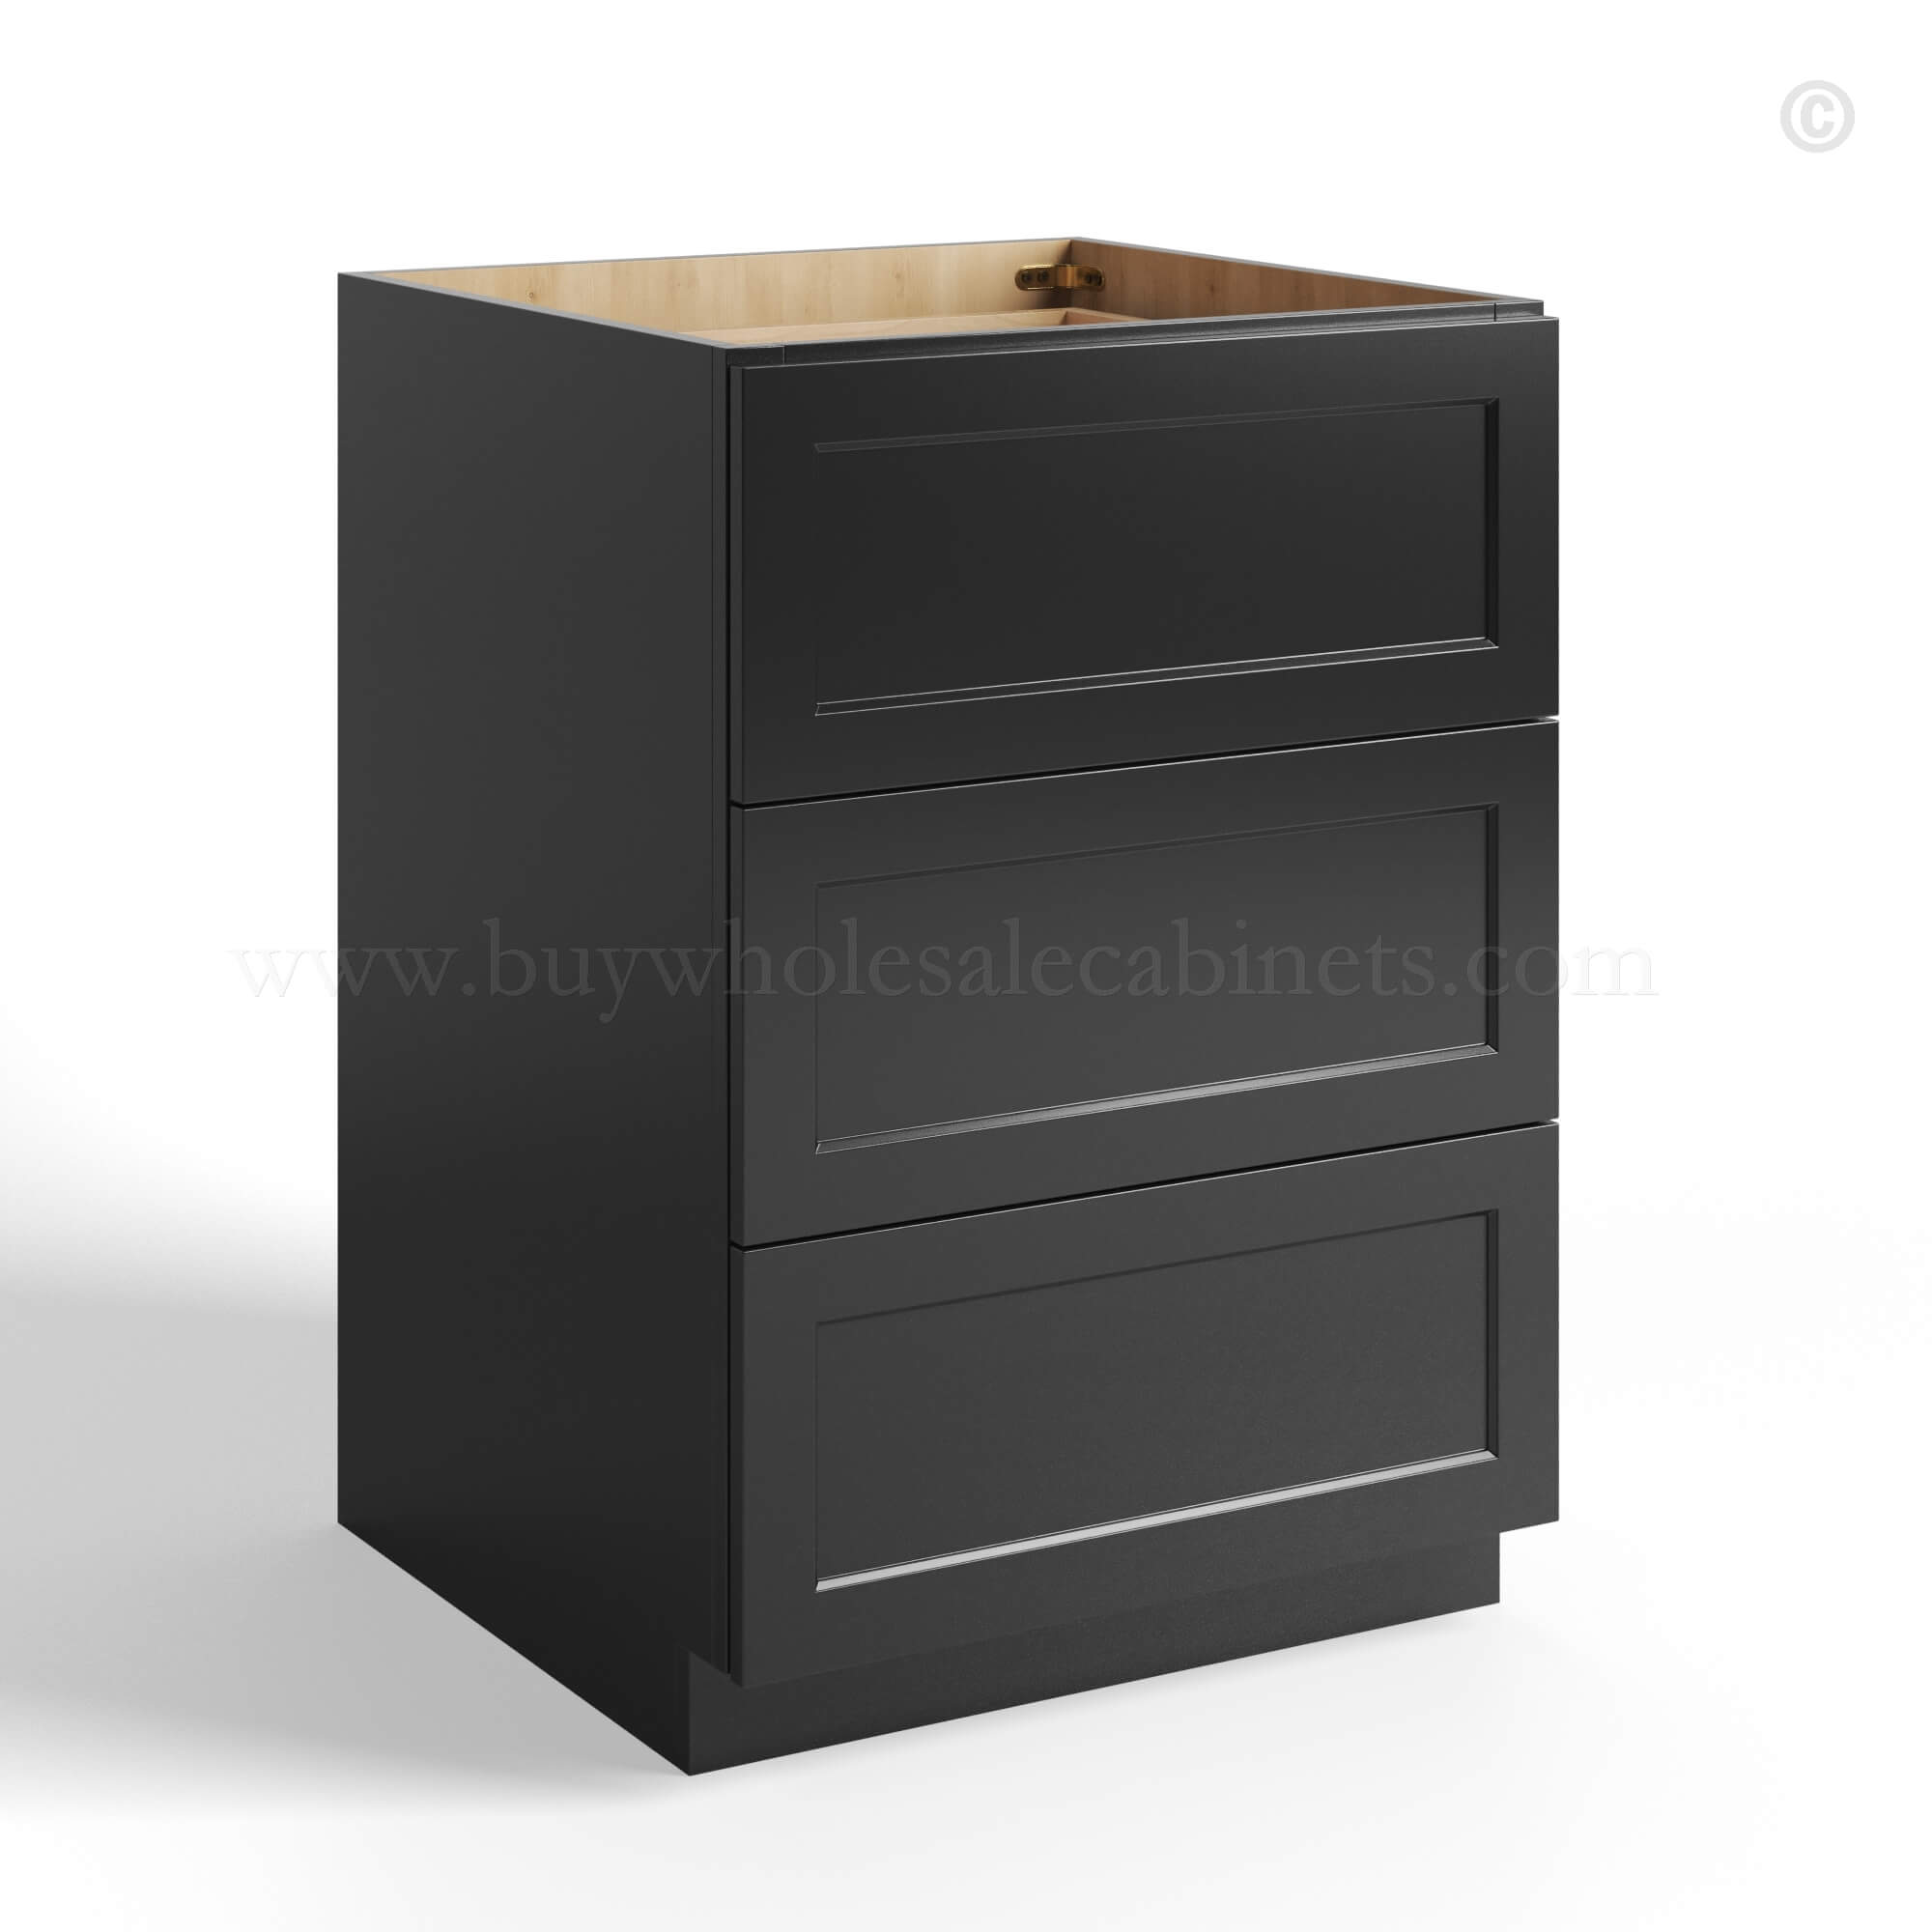 Black Shaker Base cabinet with 3 Drawers, rta cabinets, wholesale cabinets